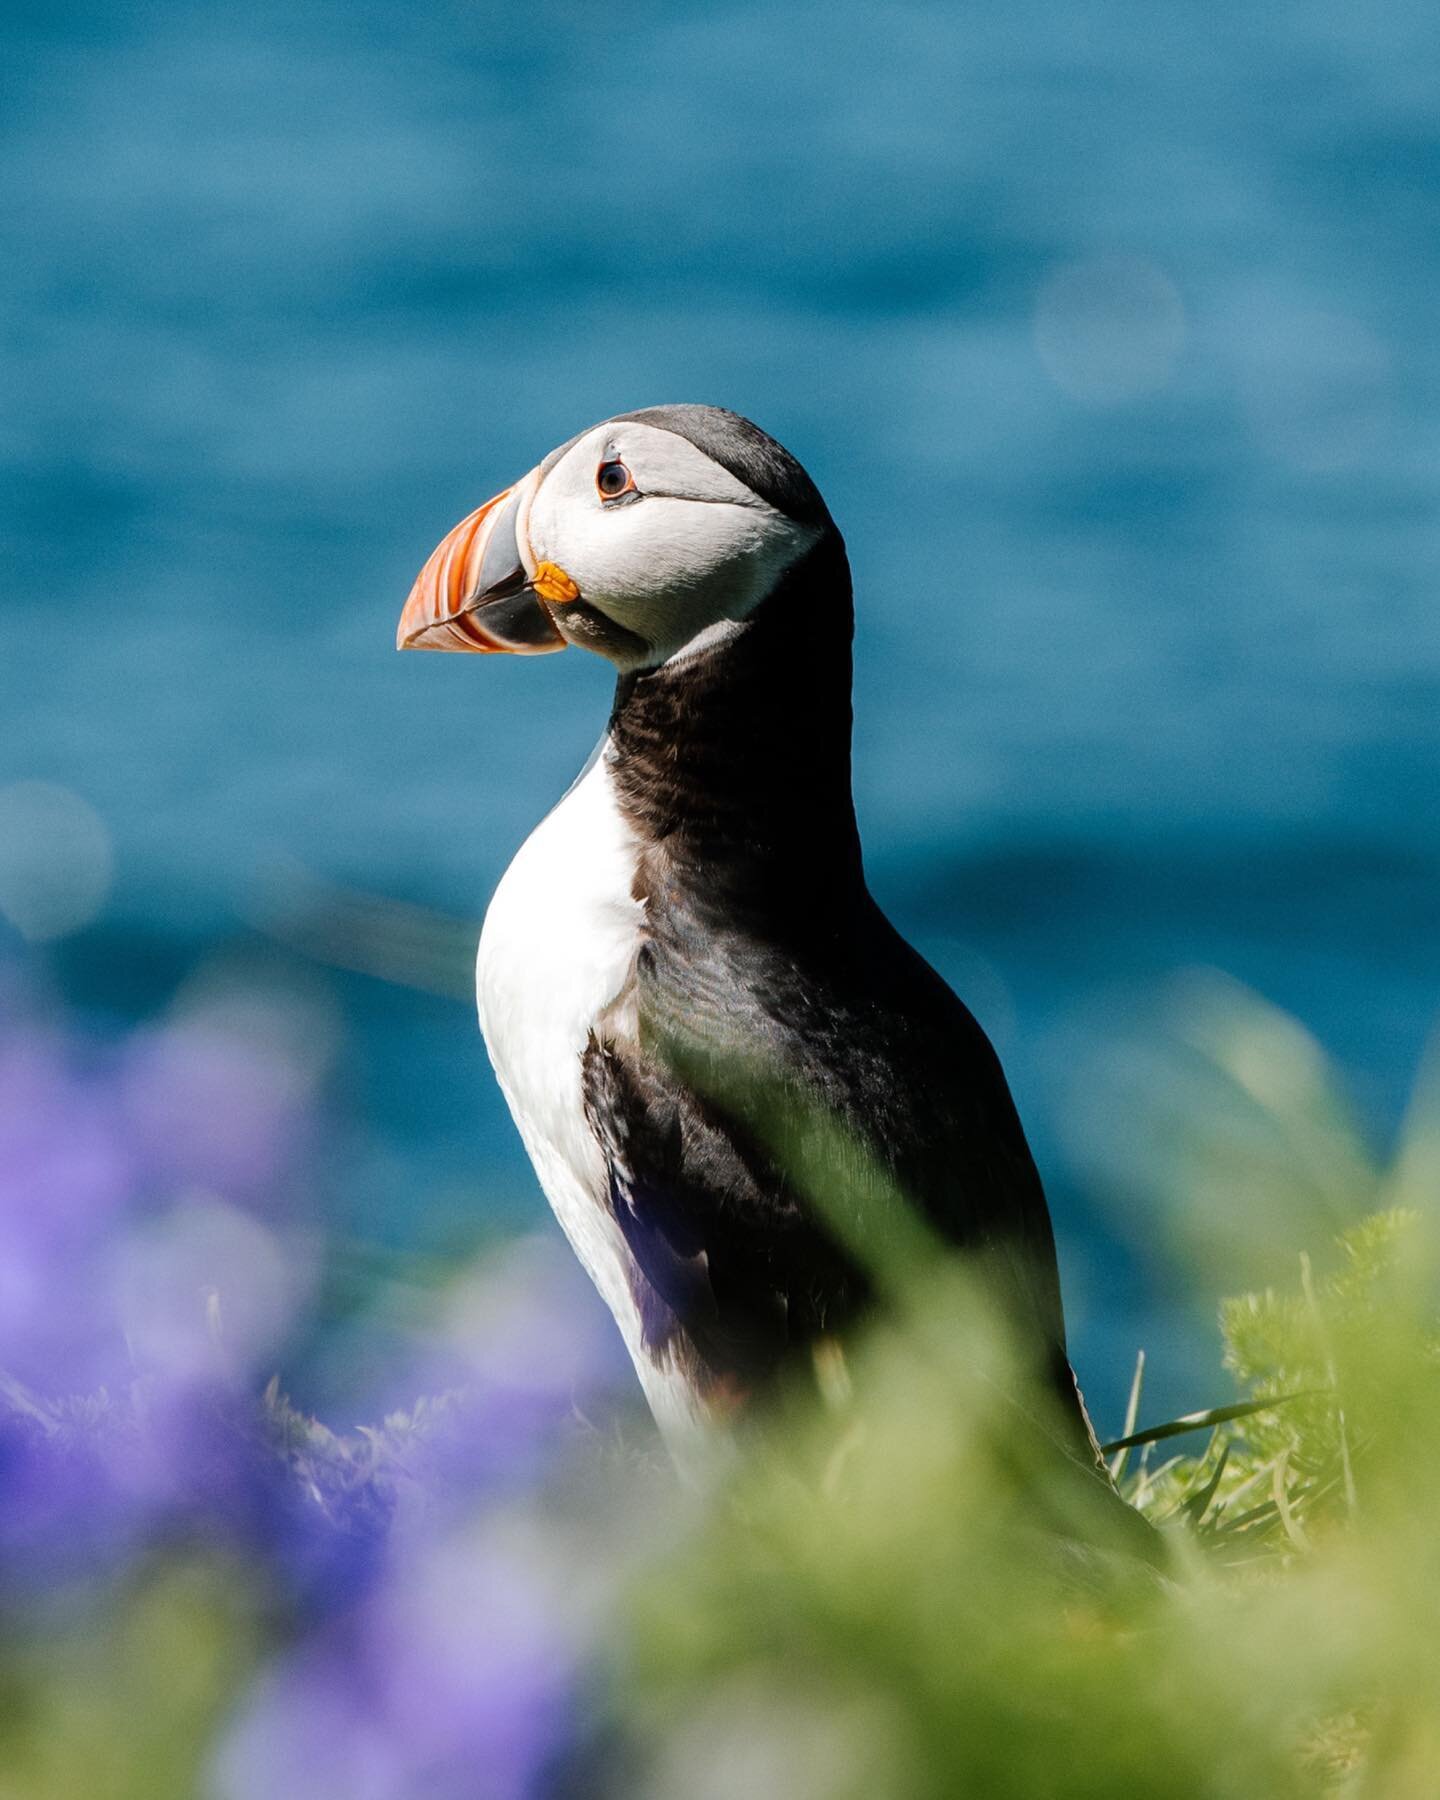 Anyone else feeling those January blues in the U.K.?! Here&rsquo;s a photo of a Puffin to make you smile! 
I&rsquo;m missing the bike season &amp; travelling around. 
Finding myself getting jealous of what feels like everyone on my news feed being in